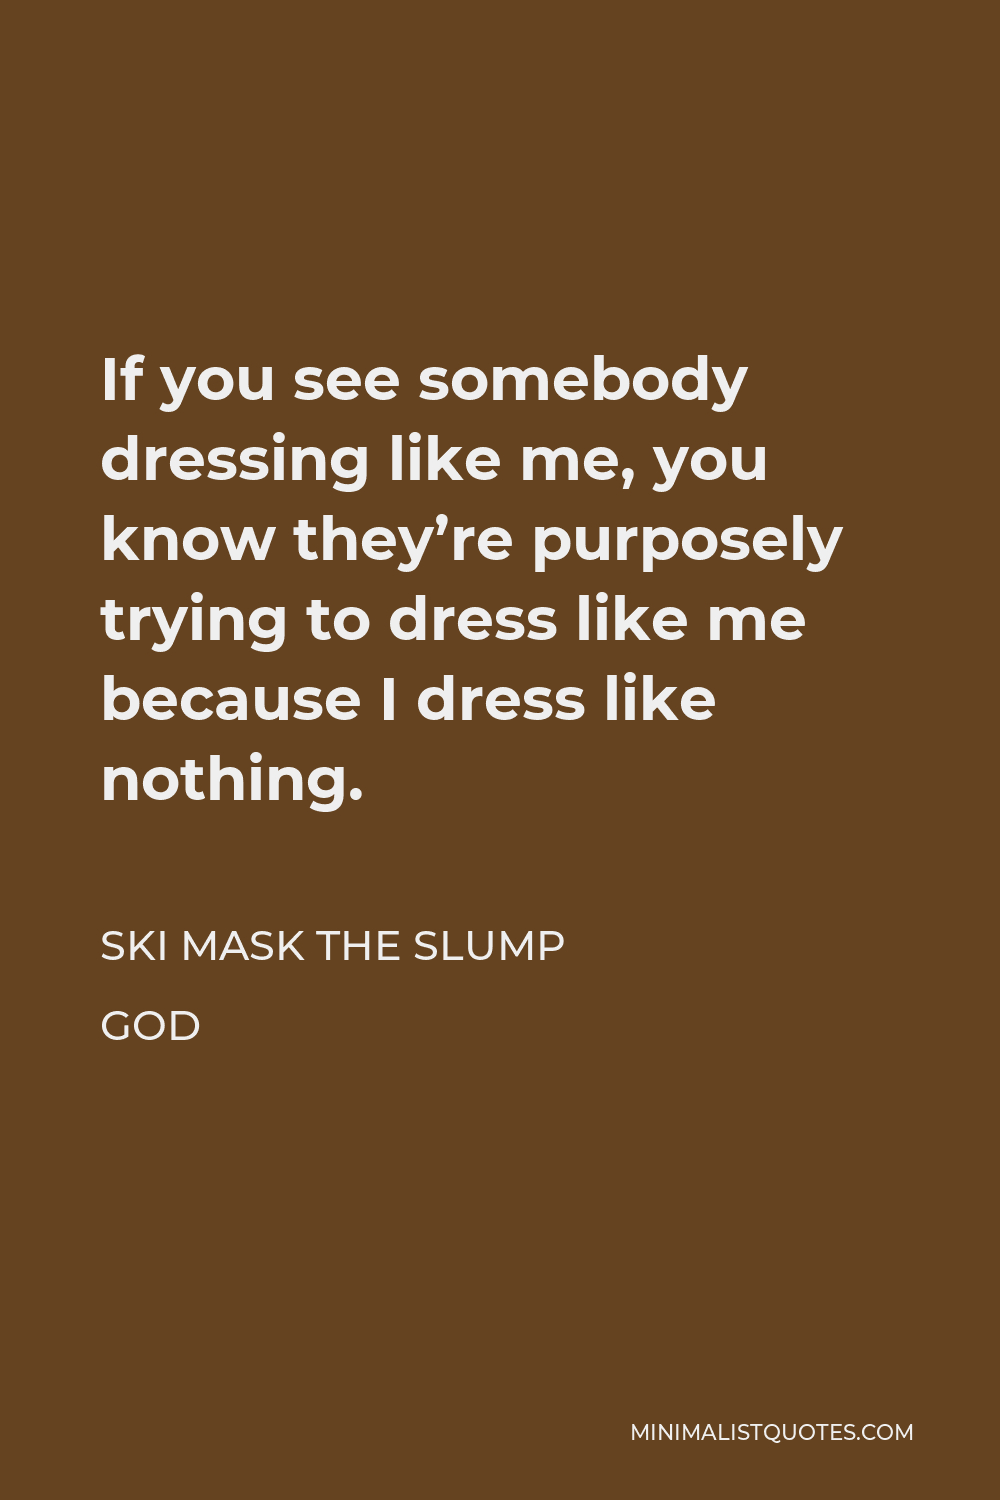 Ski Mask the Slump God Quote - If you see somebody dressing like me, you know they’re purposely trying to dress like me because I dress like nothing.